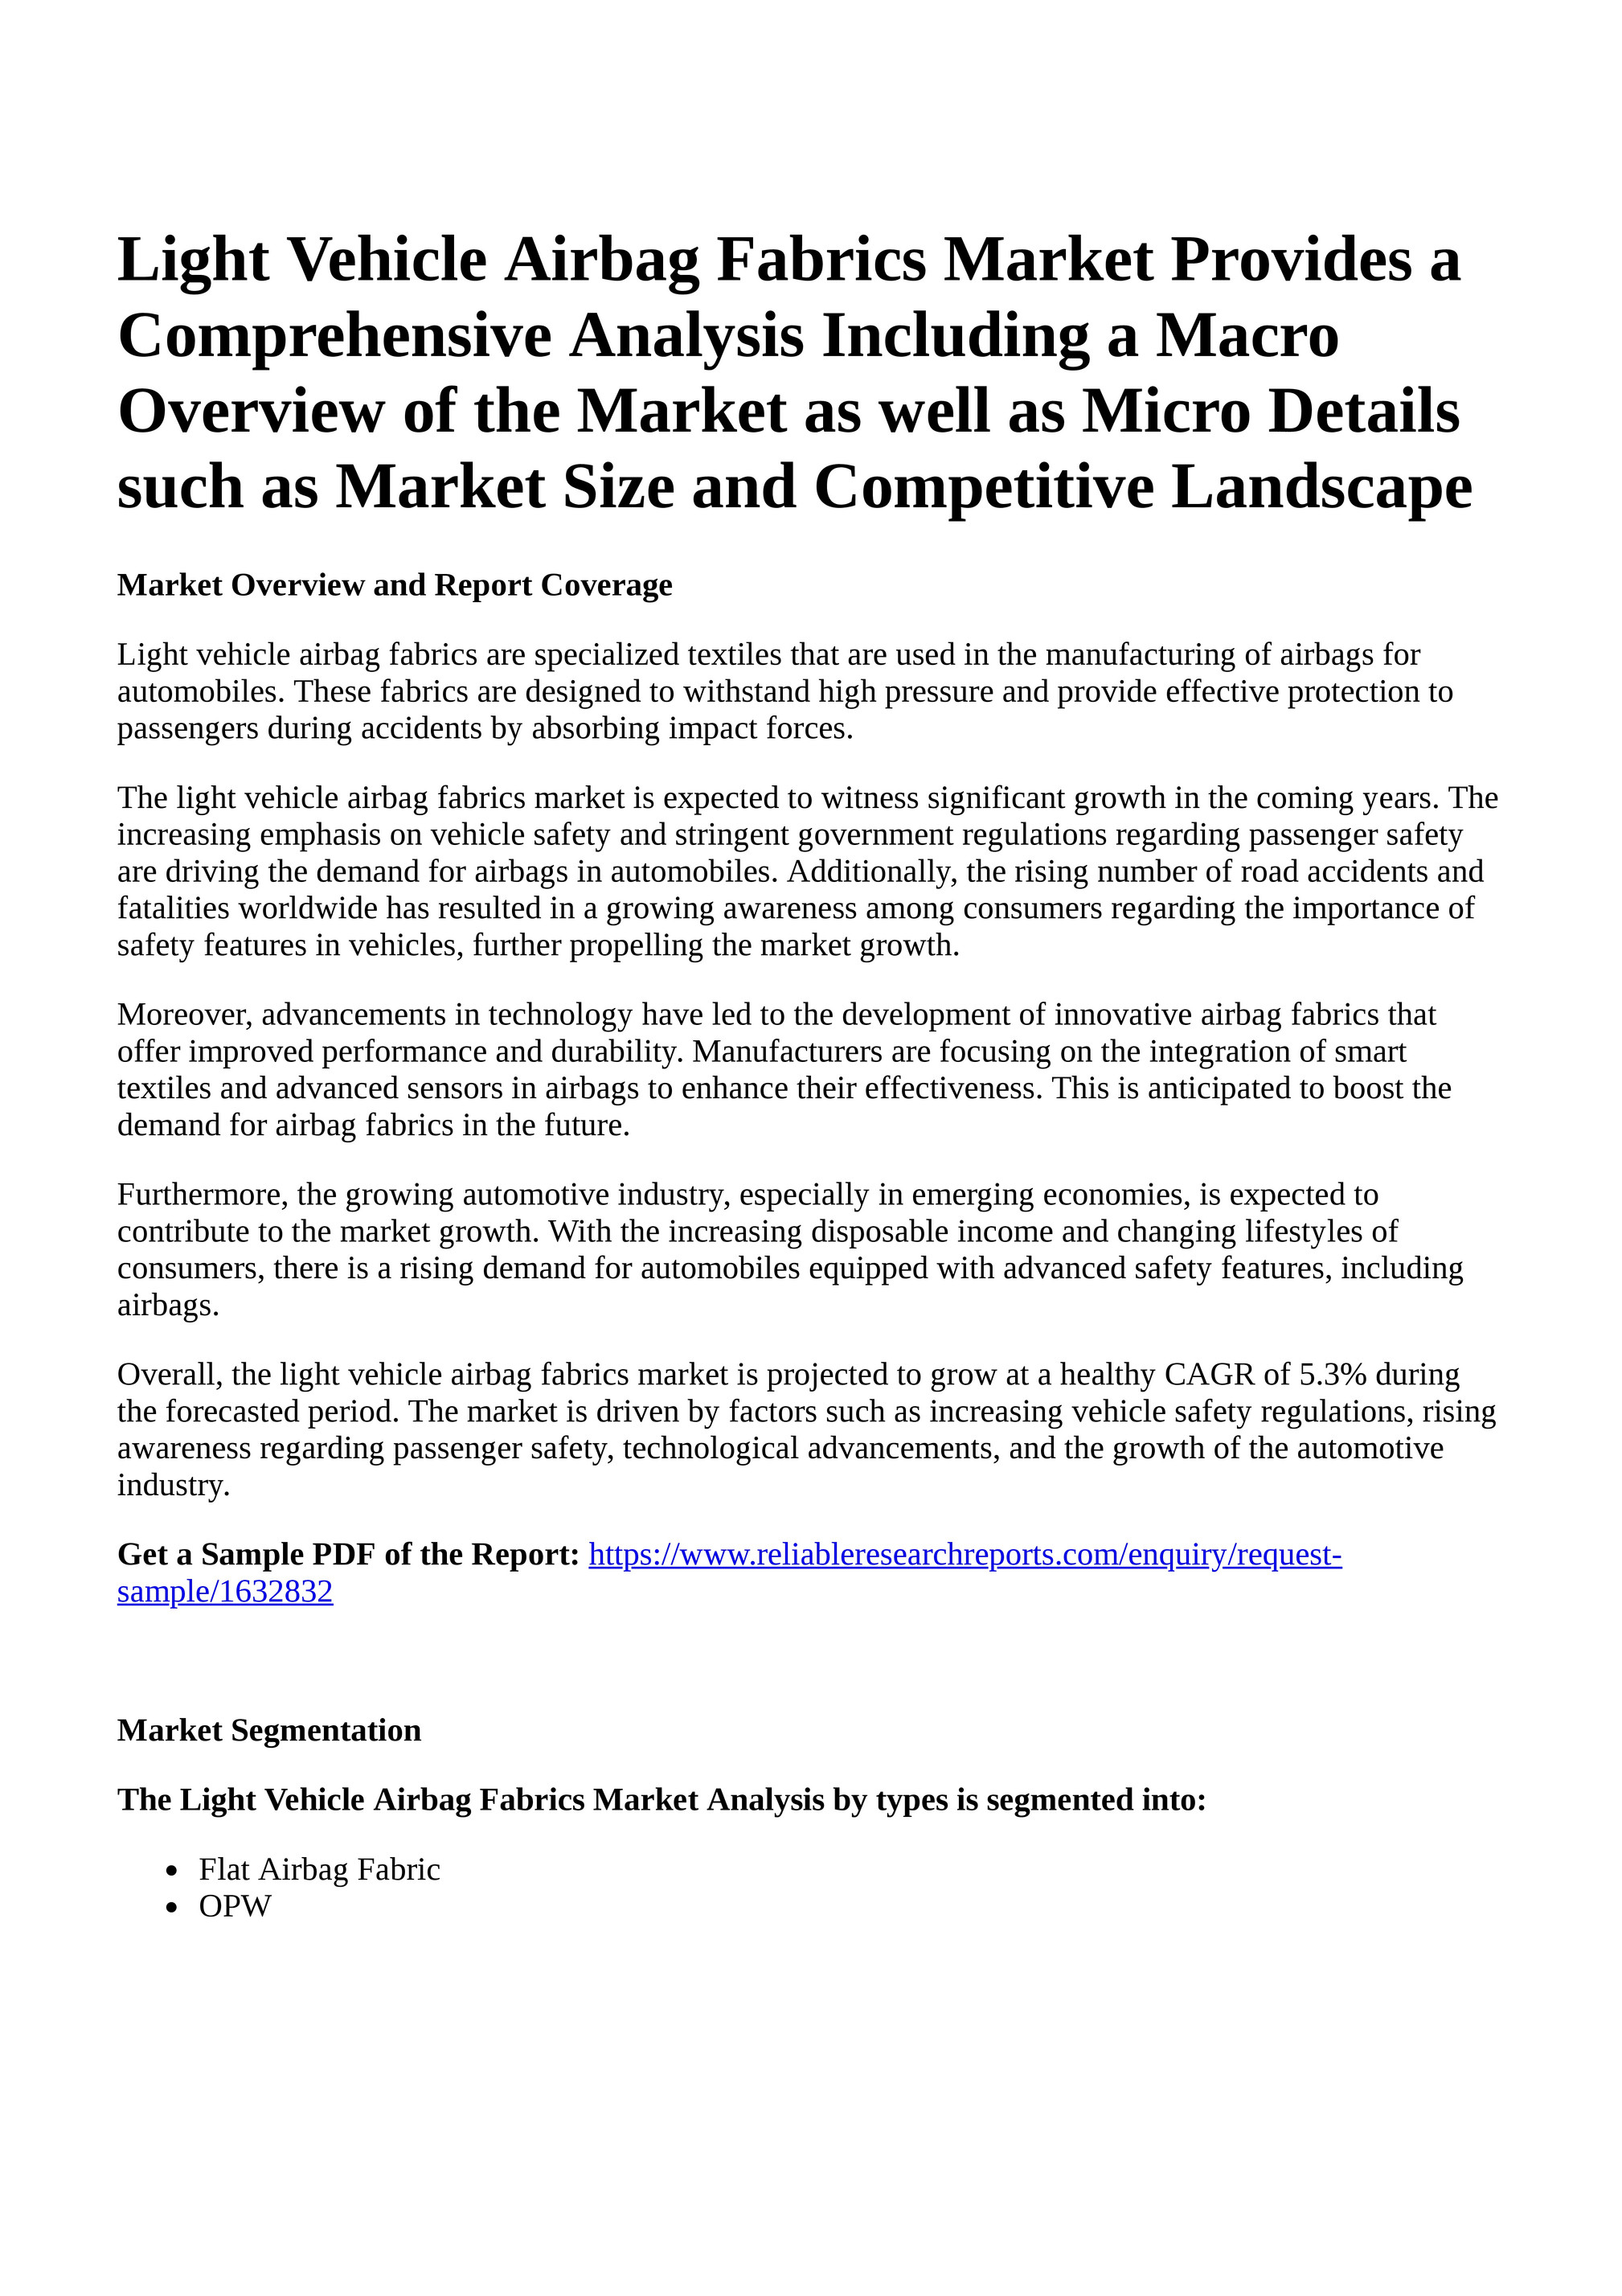 Reportprime - Light Vehicle Airbag Fabrics Market Provides a Comprehensive  Analysis Including a Macro Overview of the Market as well as Micro Details  such as Market Size and Competitive Landscape - Page 2-3